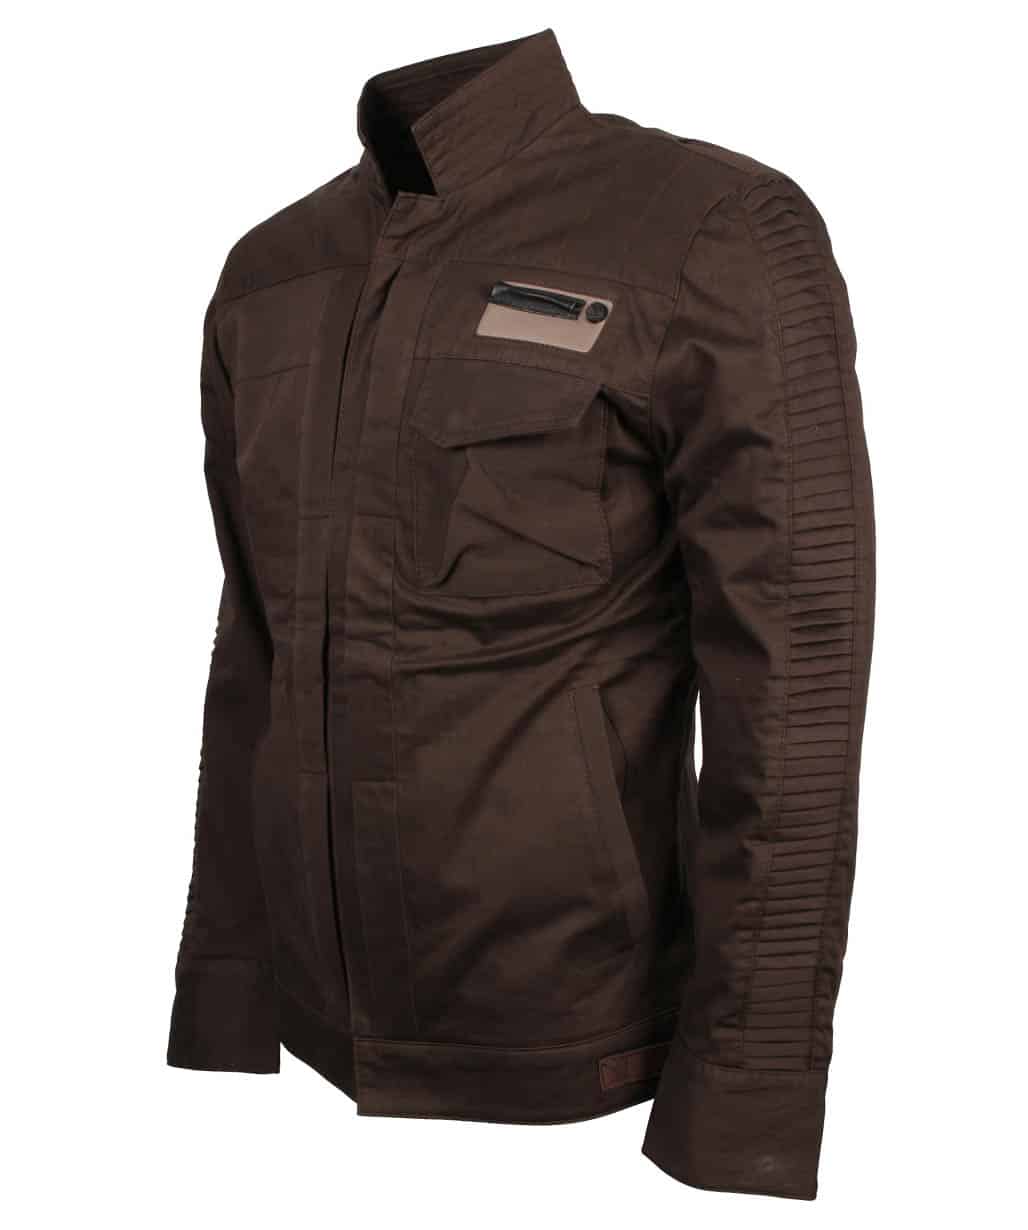 star-wars-rogue-one-captain-cassian-andor-jacket-outfit